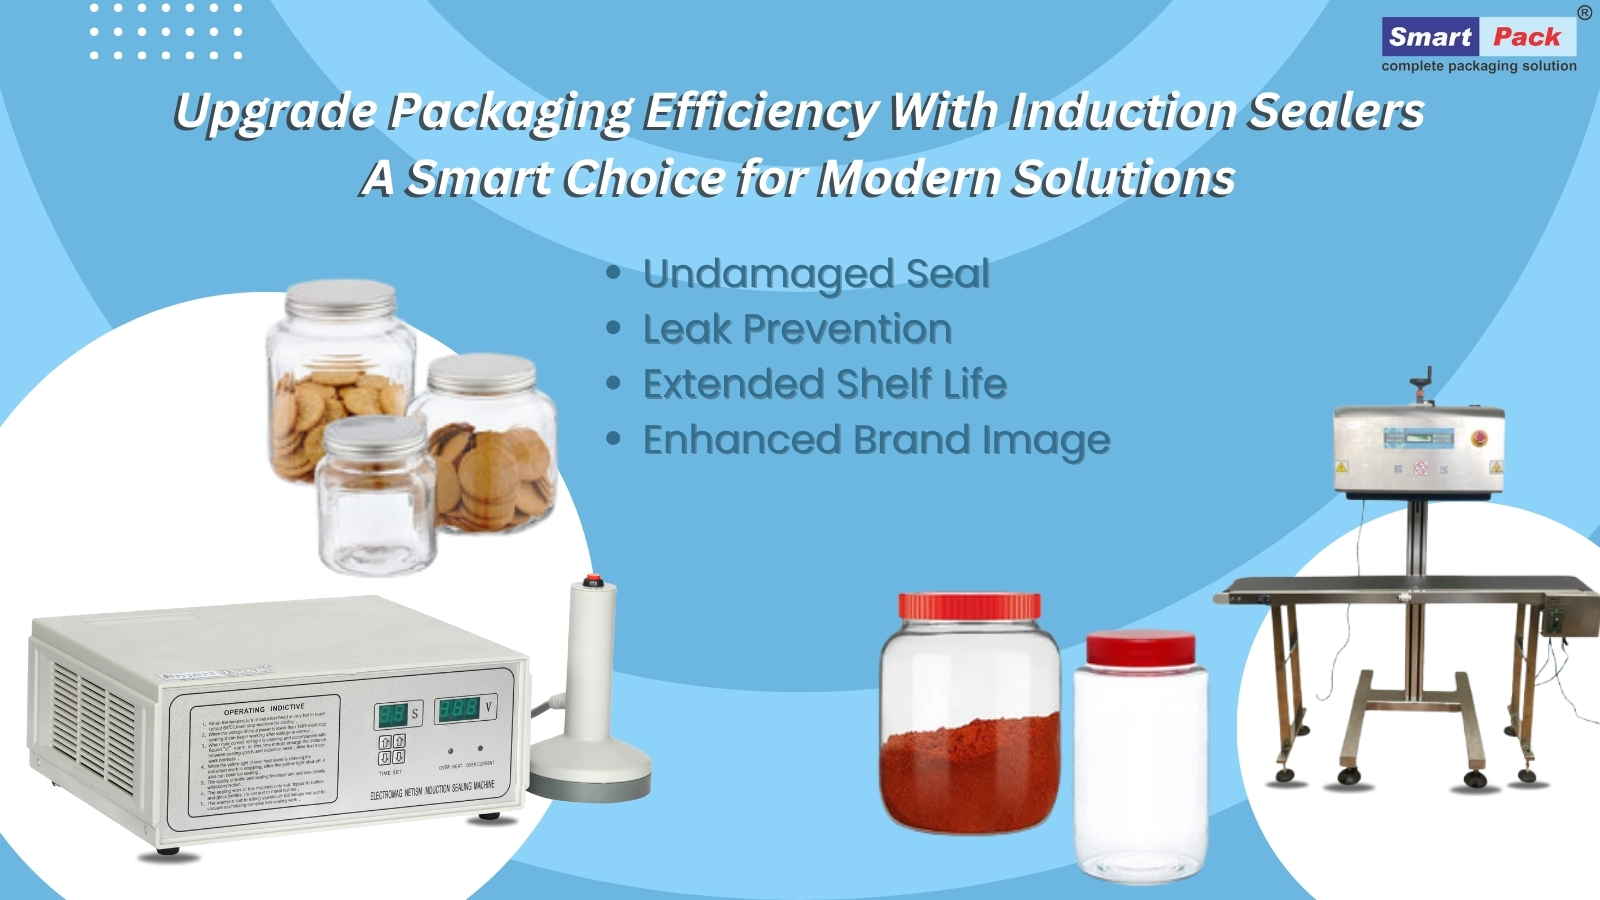 Upgrade Packaging Efficiency with Induction Sealers: A Smart Choice for Modern Solutions